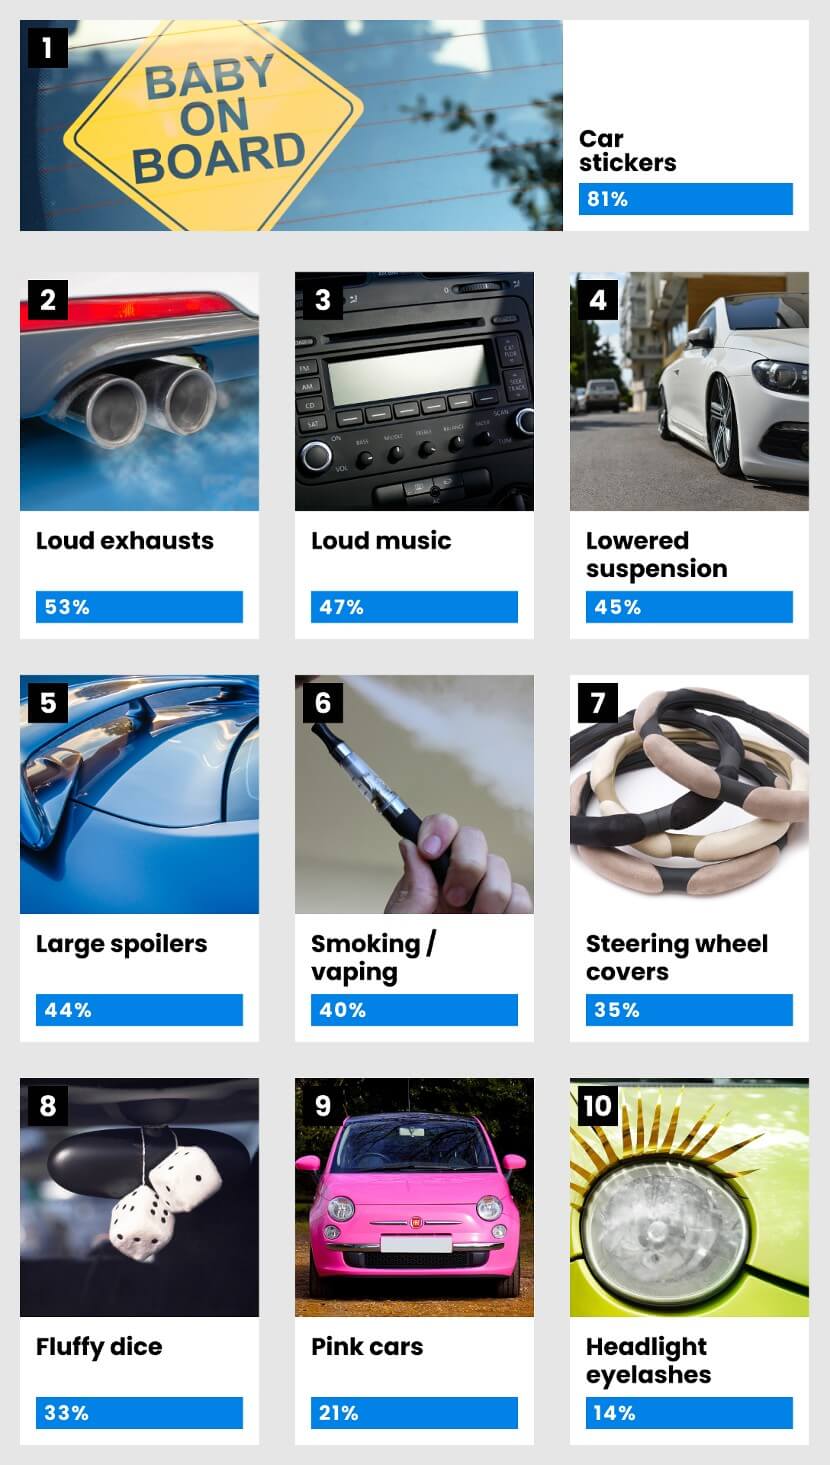 Top 10 images of car habits that give you the ick